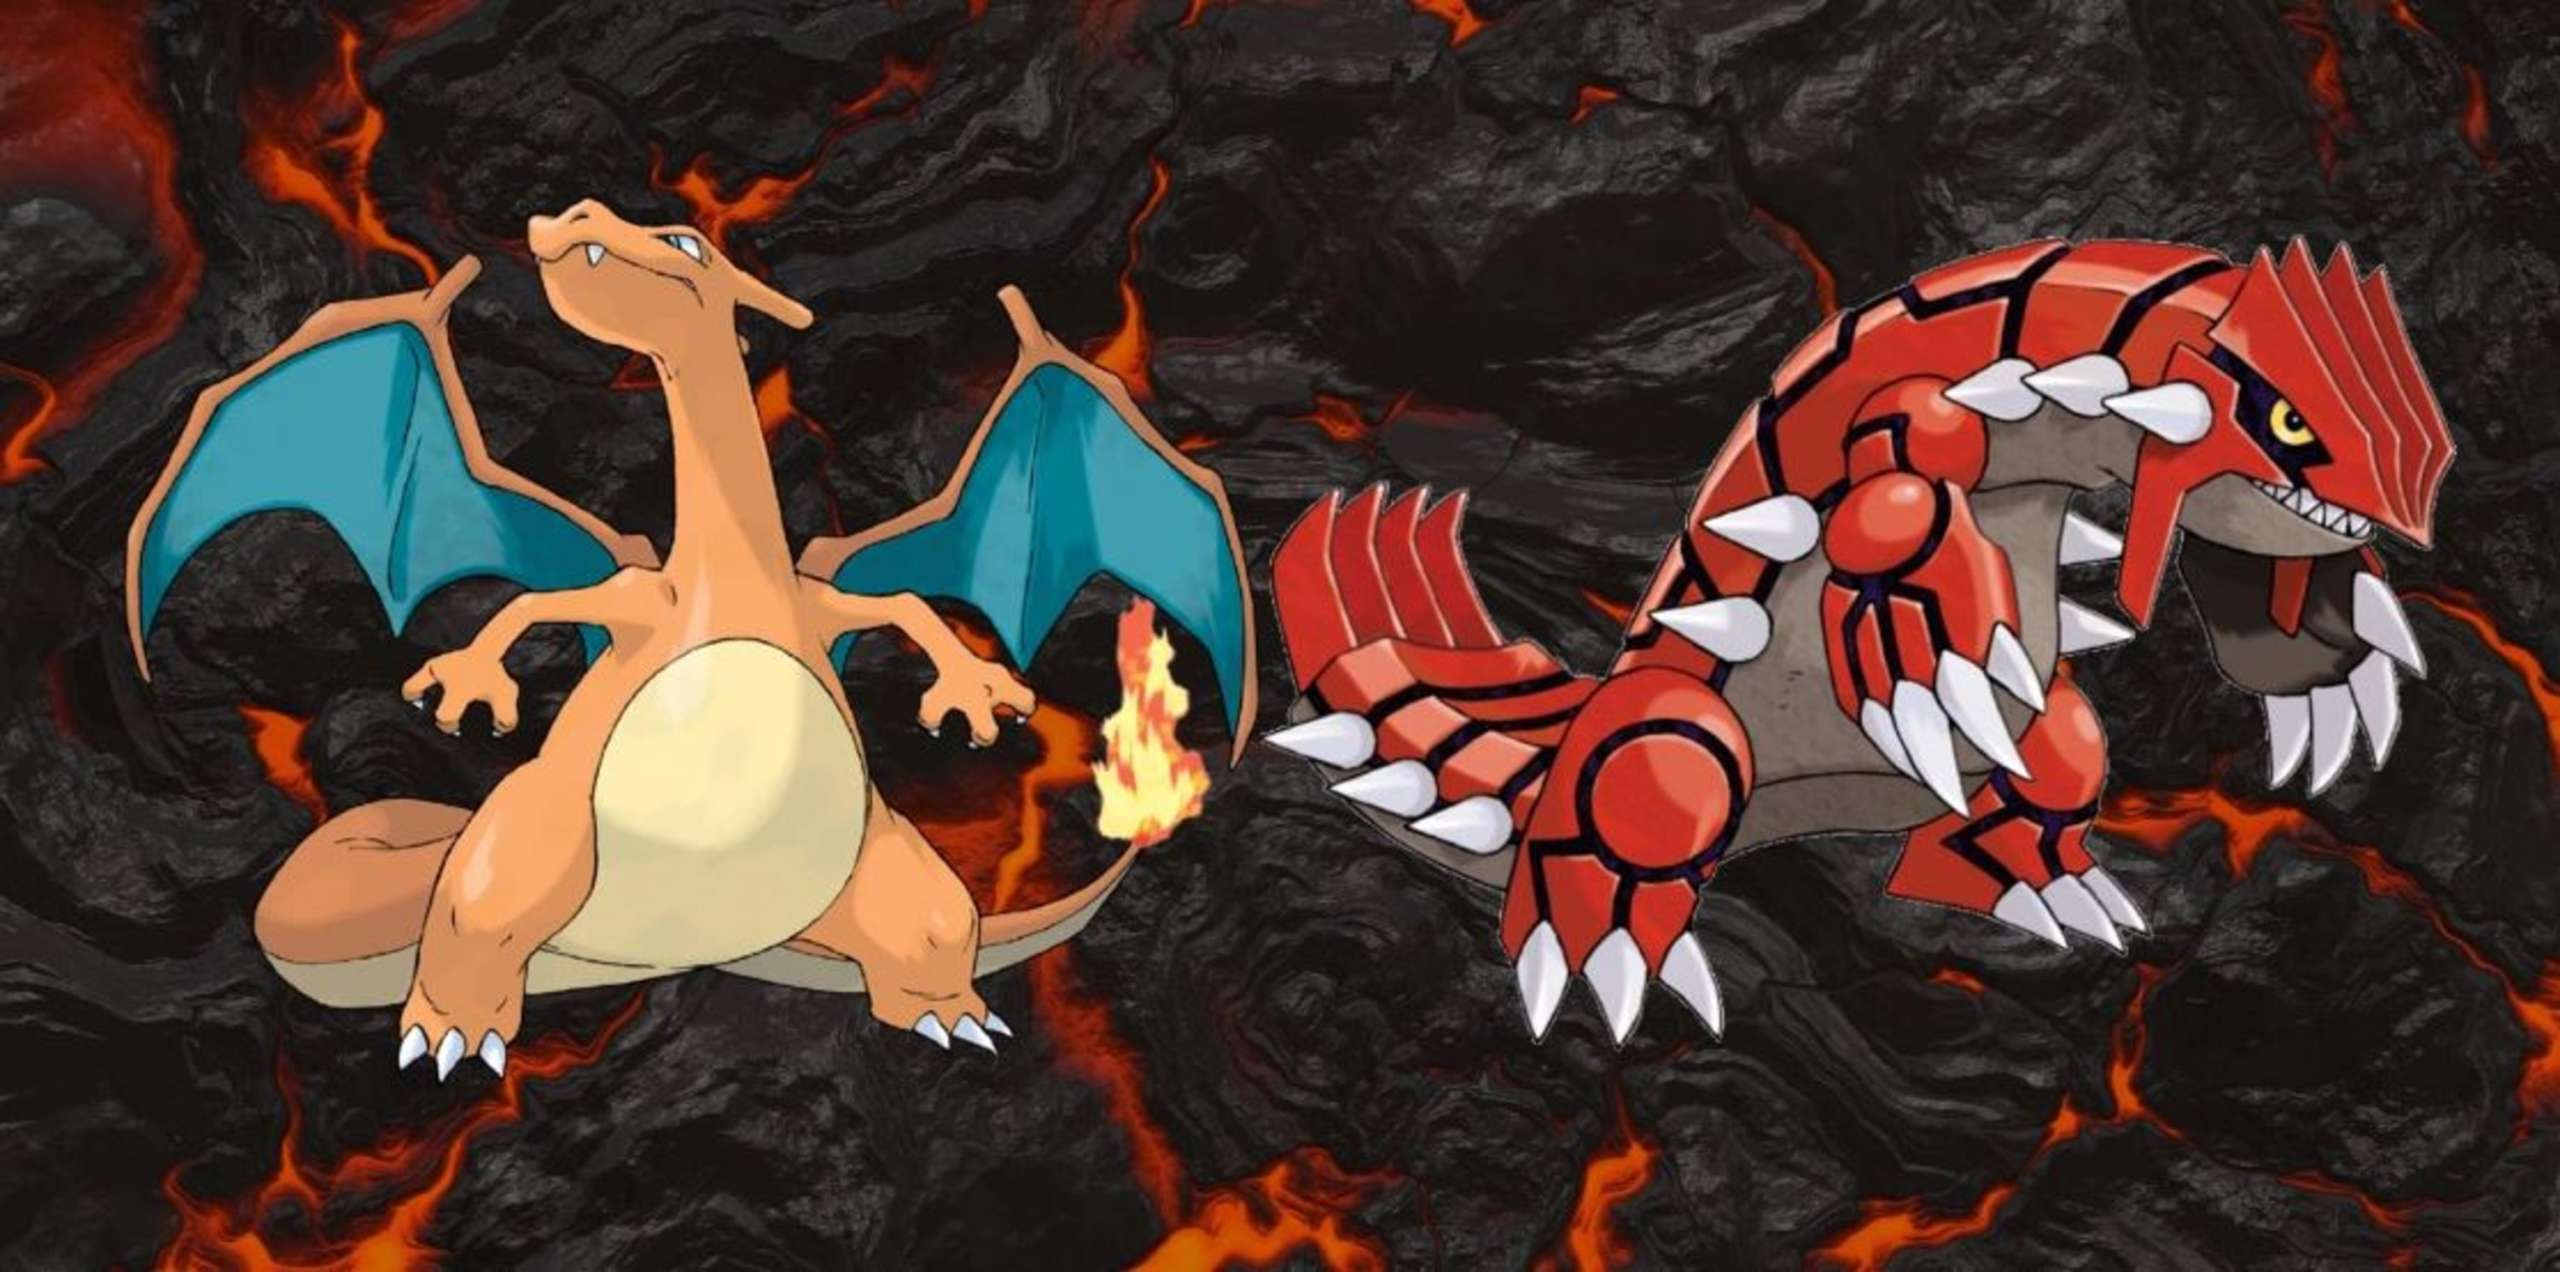 A Talented Pokemon Fan Has Combined The Two Wildly Popular Monsters, Charizard And Groudon, To Create An Incredible Piece Of Artwork